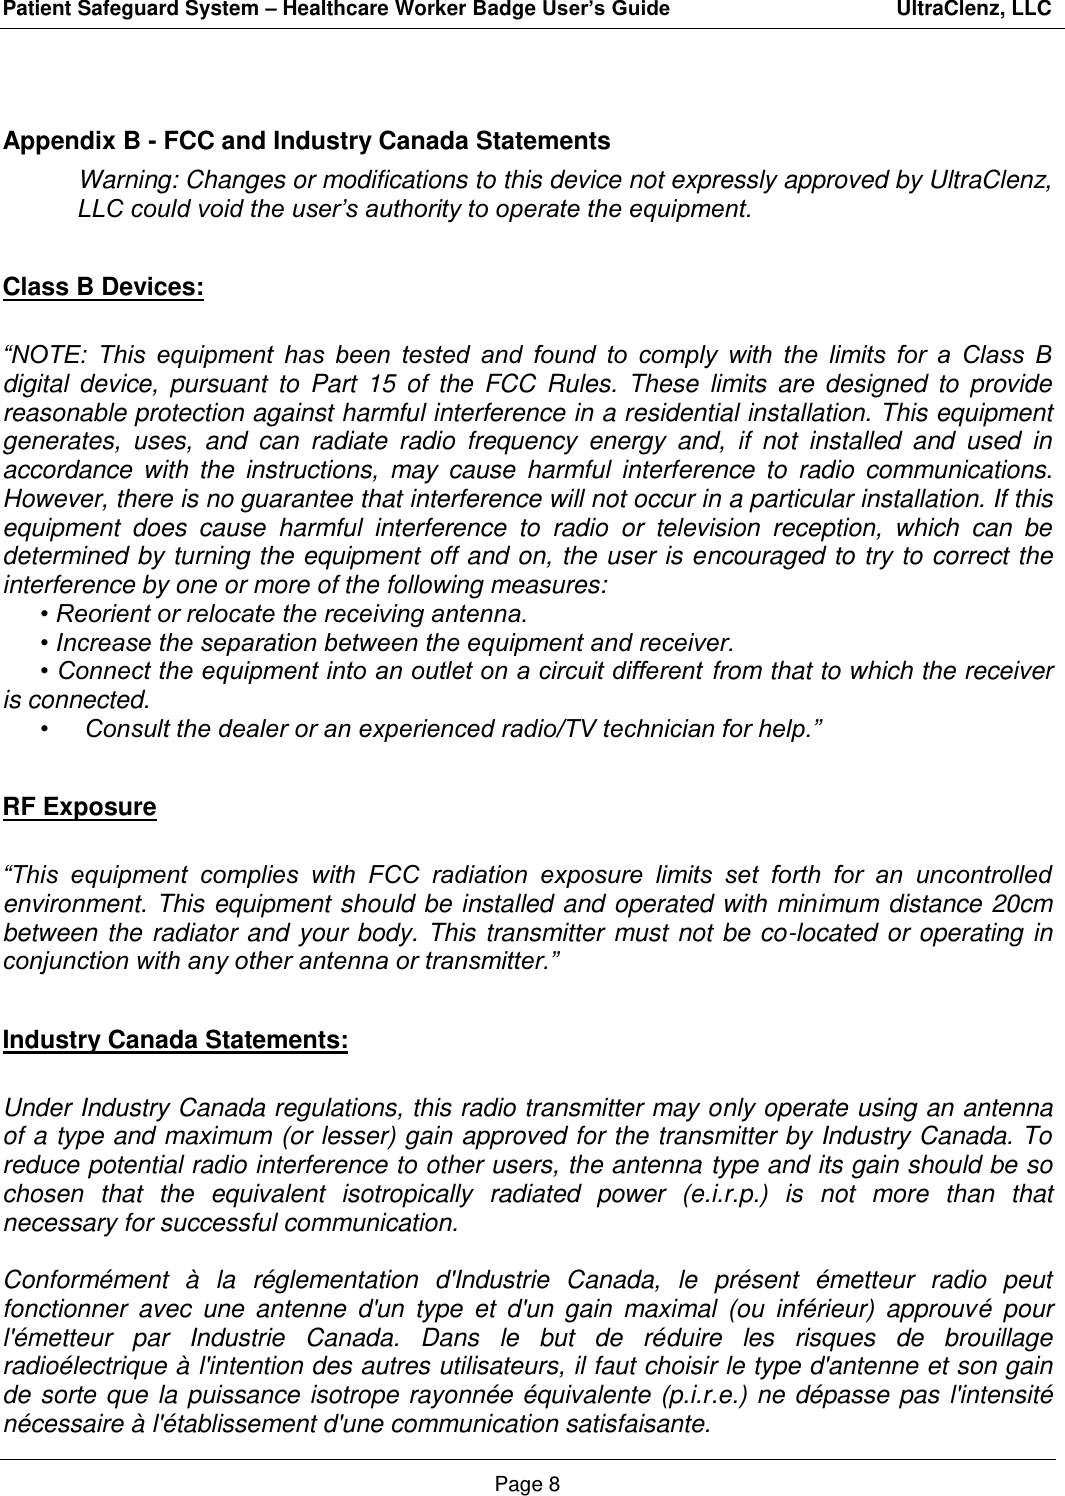 Patient Safeguard System – Healthcare Worker Badge User’s Guide                                       UltraClenz, LLC Page 8  Appendix B - FCC and Industry Canada Statements Warning: Changes or modifications to this device not expressly approved by UltraClenz, LLC could void the user’s authority to operate the equipment.  Class B Devices:  “NOTE:  This  equipment  has  been  tested  and  found  to  comply  with  the  limits  for  a  Class  B digital  device,  pursuant  to  Part  15  of  the  FCC  Rules.  These  limits  are  designed  to  provide reasonable protection against harmful interference in a residential installation. This equipment generates,  uses,  and  can  radiate  radio  frequency  energy  and,  if  not  installed  and  used  in accordance  with the  instructions,  may  cause  harmful  interference  to  radio  communications. However, there is no guarantee that interference will not occur in a particular installation. If this equipment  does  cause  harmful  interference  to  radio  or  television  reception,  which  can  be determined by turning the equipment off and on, the user is encouraged to try to correct the interference by one or more of the following measures:   • Reorient or relocate the receiving antenna.  • Increase the separation between the equipment and receiver.  • Connect the equipment into an outlet on a circuit different from that to which the receiver is connected.  •  Consult the dealer or an experienced radio/TV technician for help.”    RF Exposure  “This  equipment  complies  with  FCC  radiation  exposure  limits  set  forth  for  an  uncontrolled environment. This  equipment should be installed and  operated with  minimum distance 20cm between  the radiator and  your body.  This  transmitter  must not  be  co-located  or operating in conjunction with any other antenna or transmitter.”  Industry Canada Statements:  Under Industry Canada regulations, this radio transmitter may only operate using an antenna of a type and maximum (or lesser) gain approved for the transmitter by Industry Canada. To reduce potential radio interference to other users, the antenna type and its gain should be so chosen  that  the  equivalent  isotropically  radiated  power  (e.i.r.p.)  is  not  more  than  that necessary for successful communication.  Conformément  à  la  réglementation  d&apos;Industrie  Canada,  le  présent  émetteur  radio  peut fonctionner  avec  une  antenne  d&apos;un  type  et  d&apos;un  gain  maximal  (ou  inférieur)  approuvé  pour l&apos;émetteur  par  Industrie  Canada.  Dans  le  but  de  réduire  les  risques  de  brouillage radioélectrique à l&apos;intention des autres utilisateurs, il faut choisir le type d&apos;antenne et son gain de  sorte que  la  puissance  isotrope rayonnée  équivalente  (p.i.r.e.)  ne  dépasse pas  l&apos;intensité nécessaire à l&apos;établissement d&apos;une communication satisfaisante. 